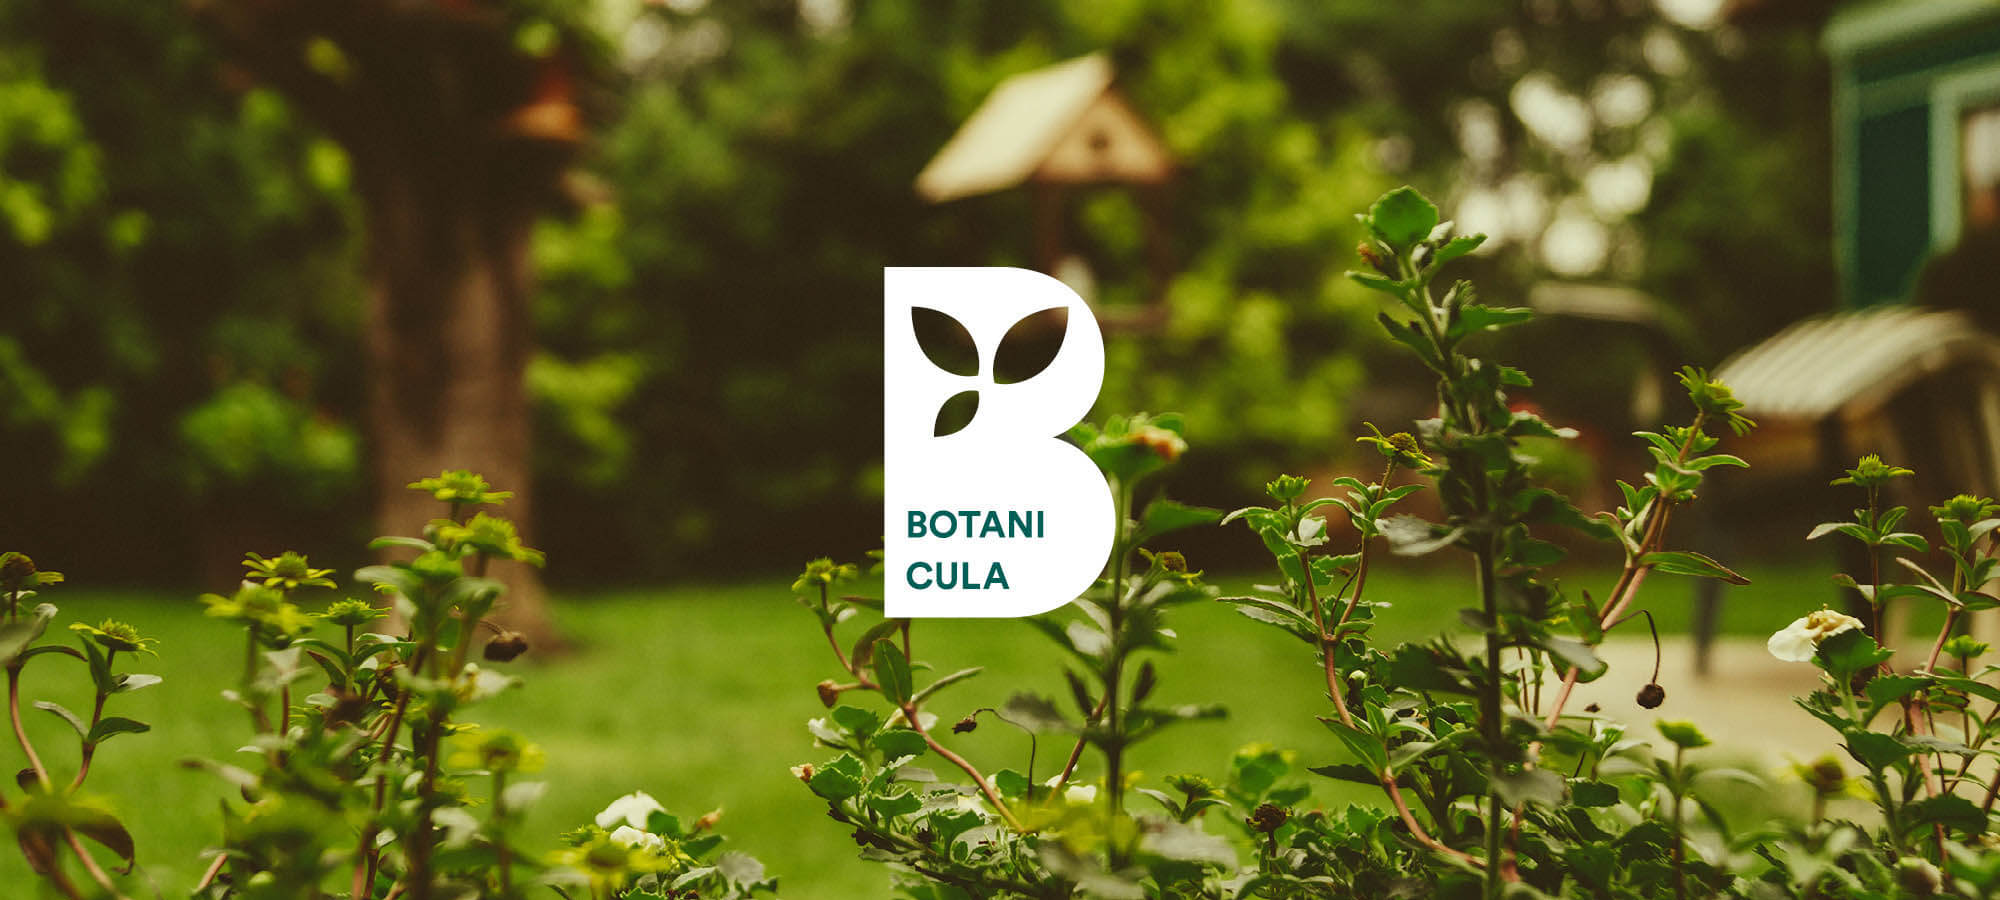 A white logo of Botanicula on a photo with trees and bushes.